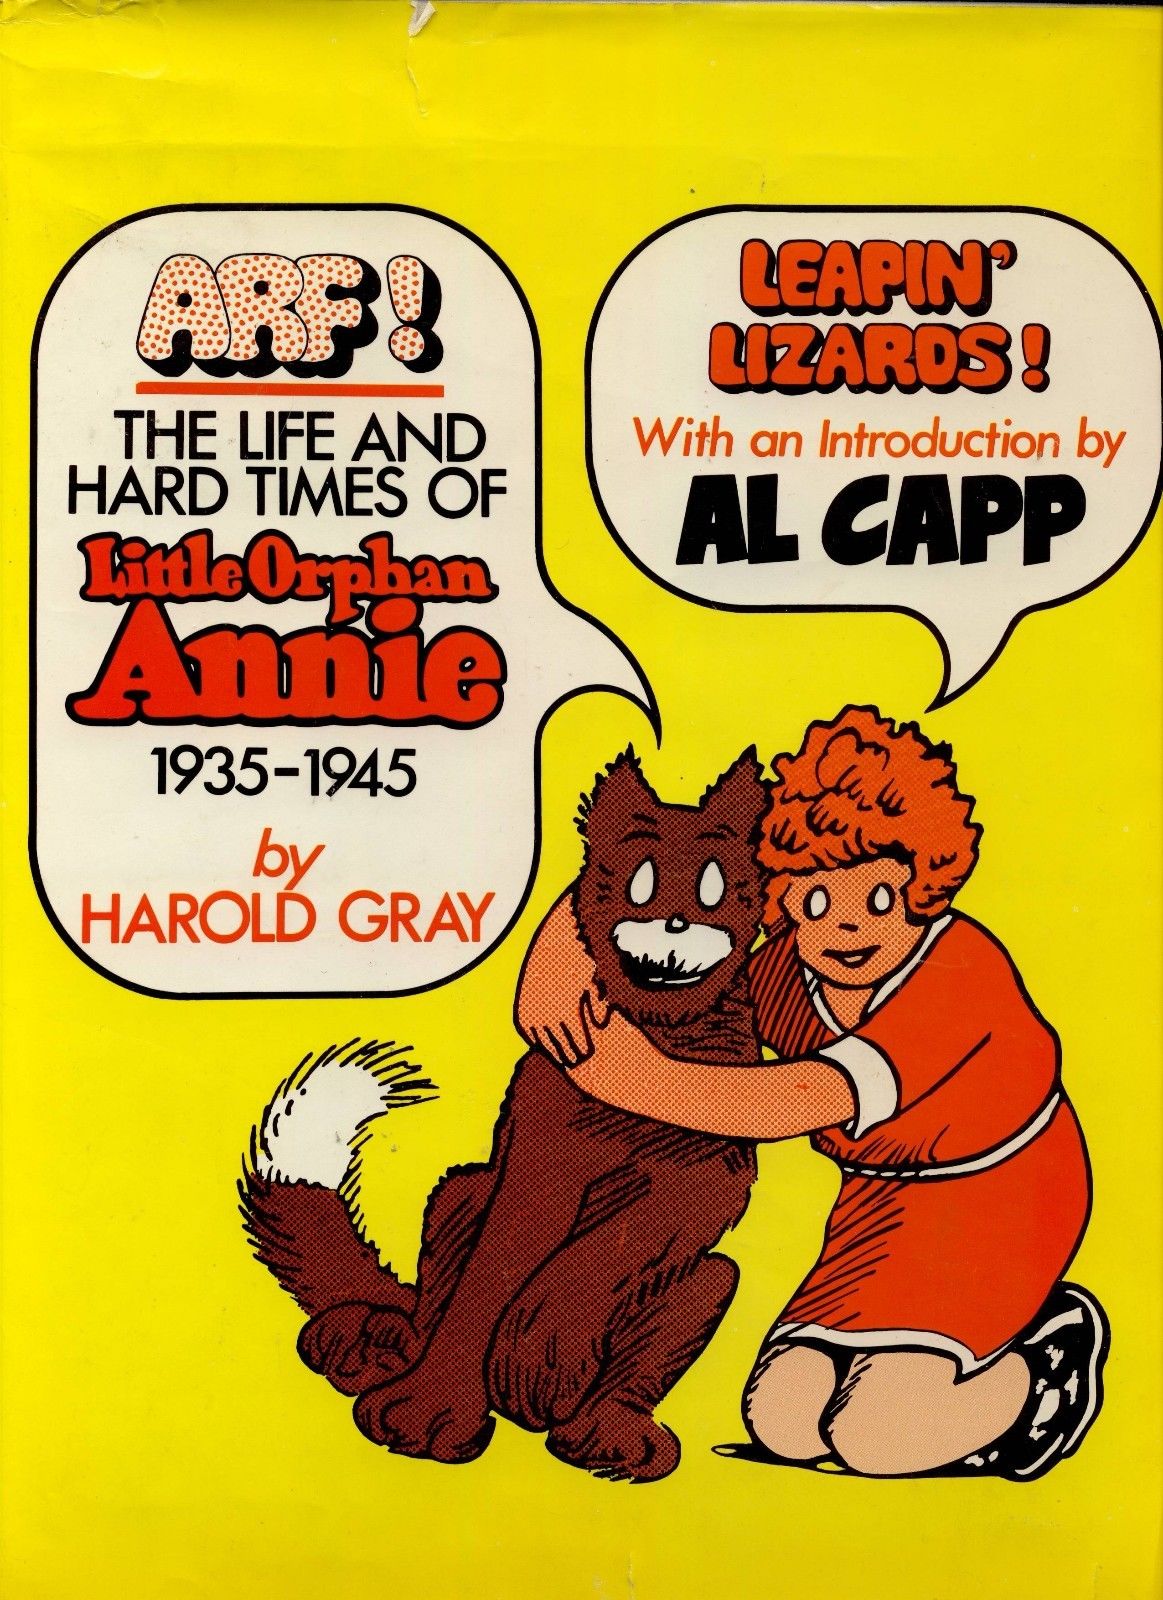 Arf! The Life and Hard Times of Little Orphan Annie